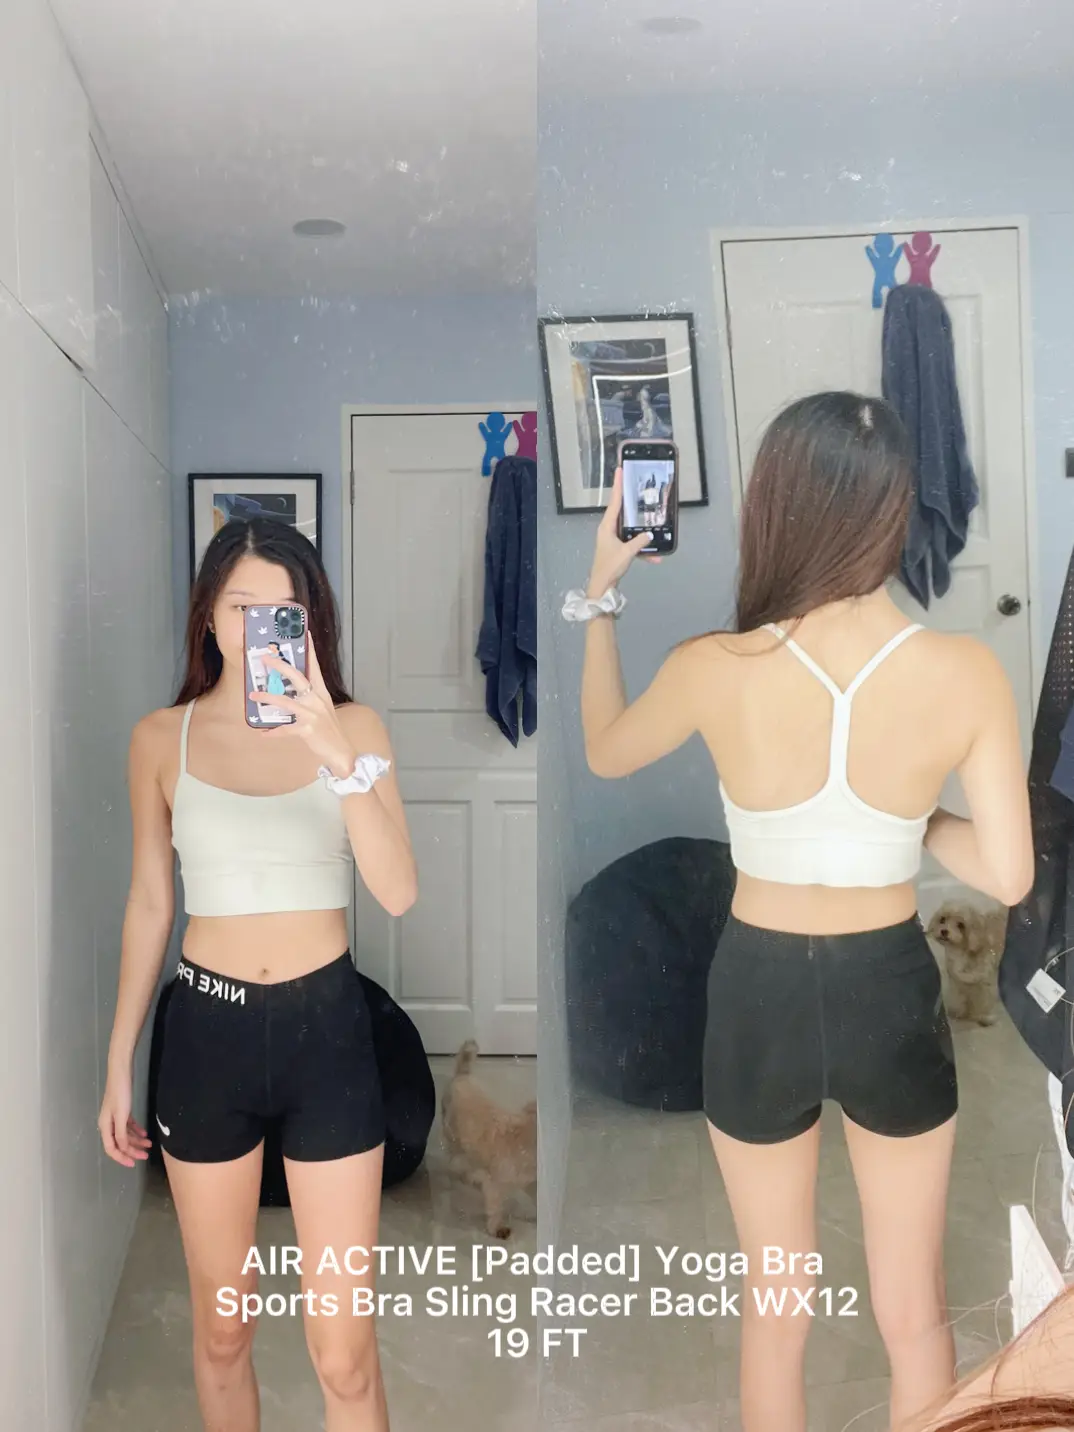 Lululemon shoppers say this $49 bra is 'super comfy and cute